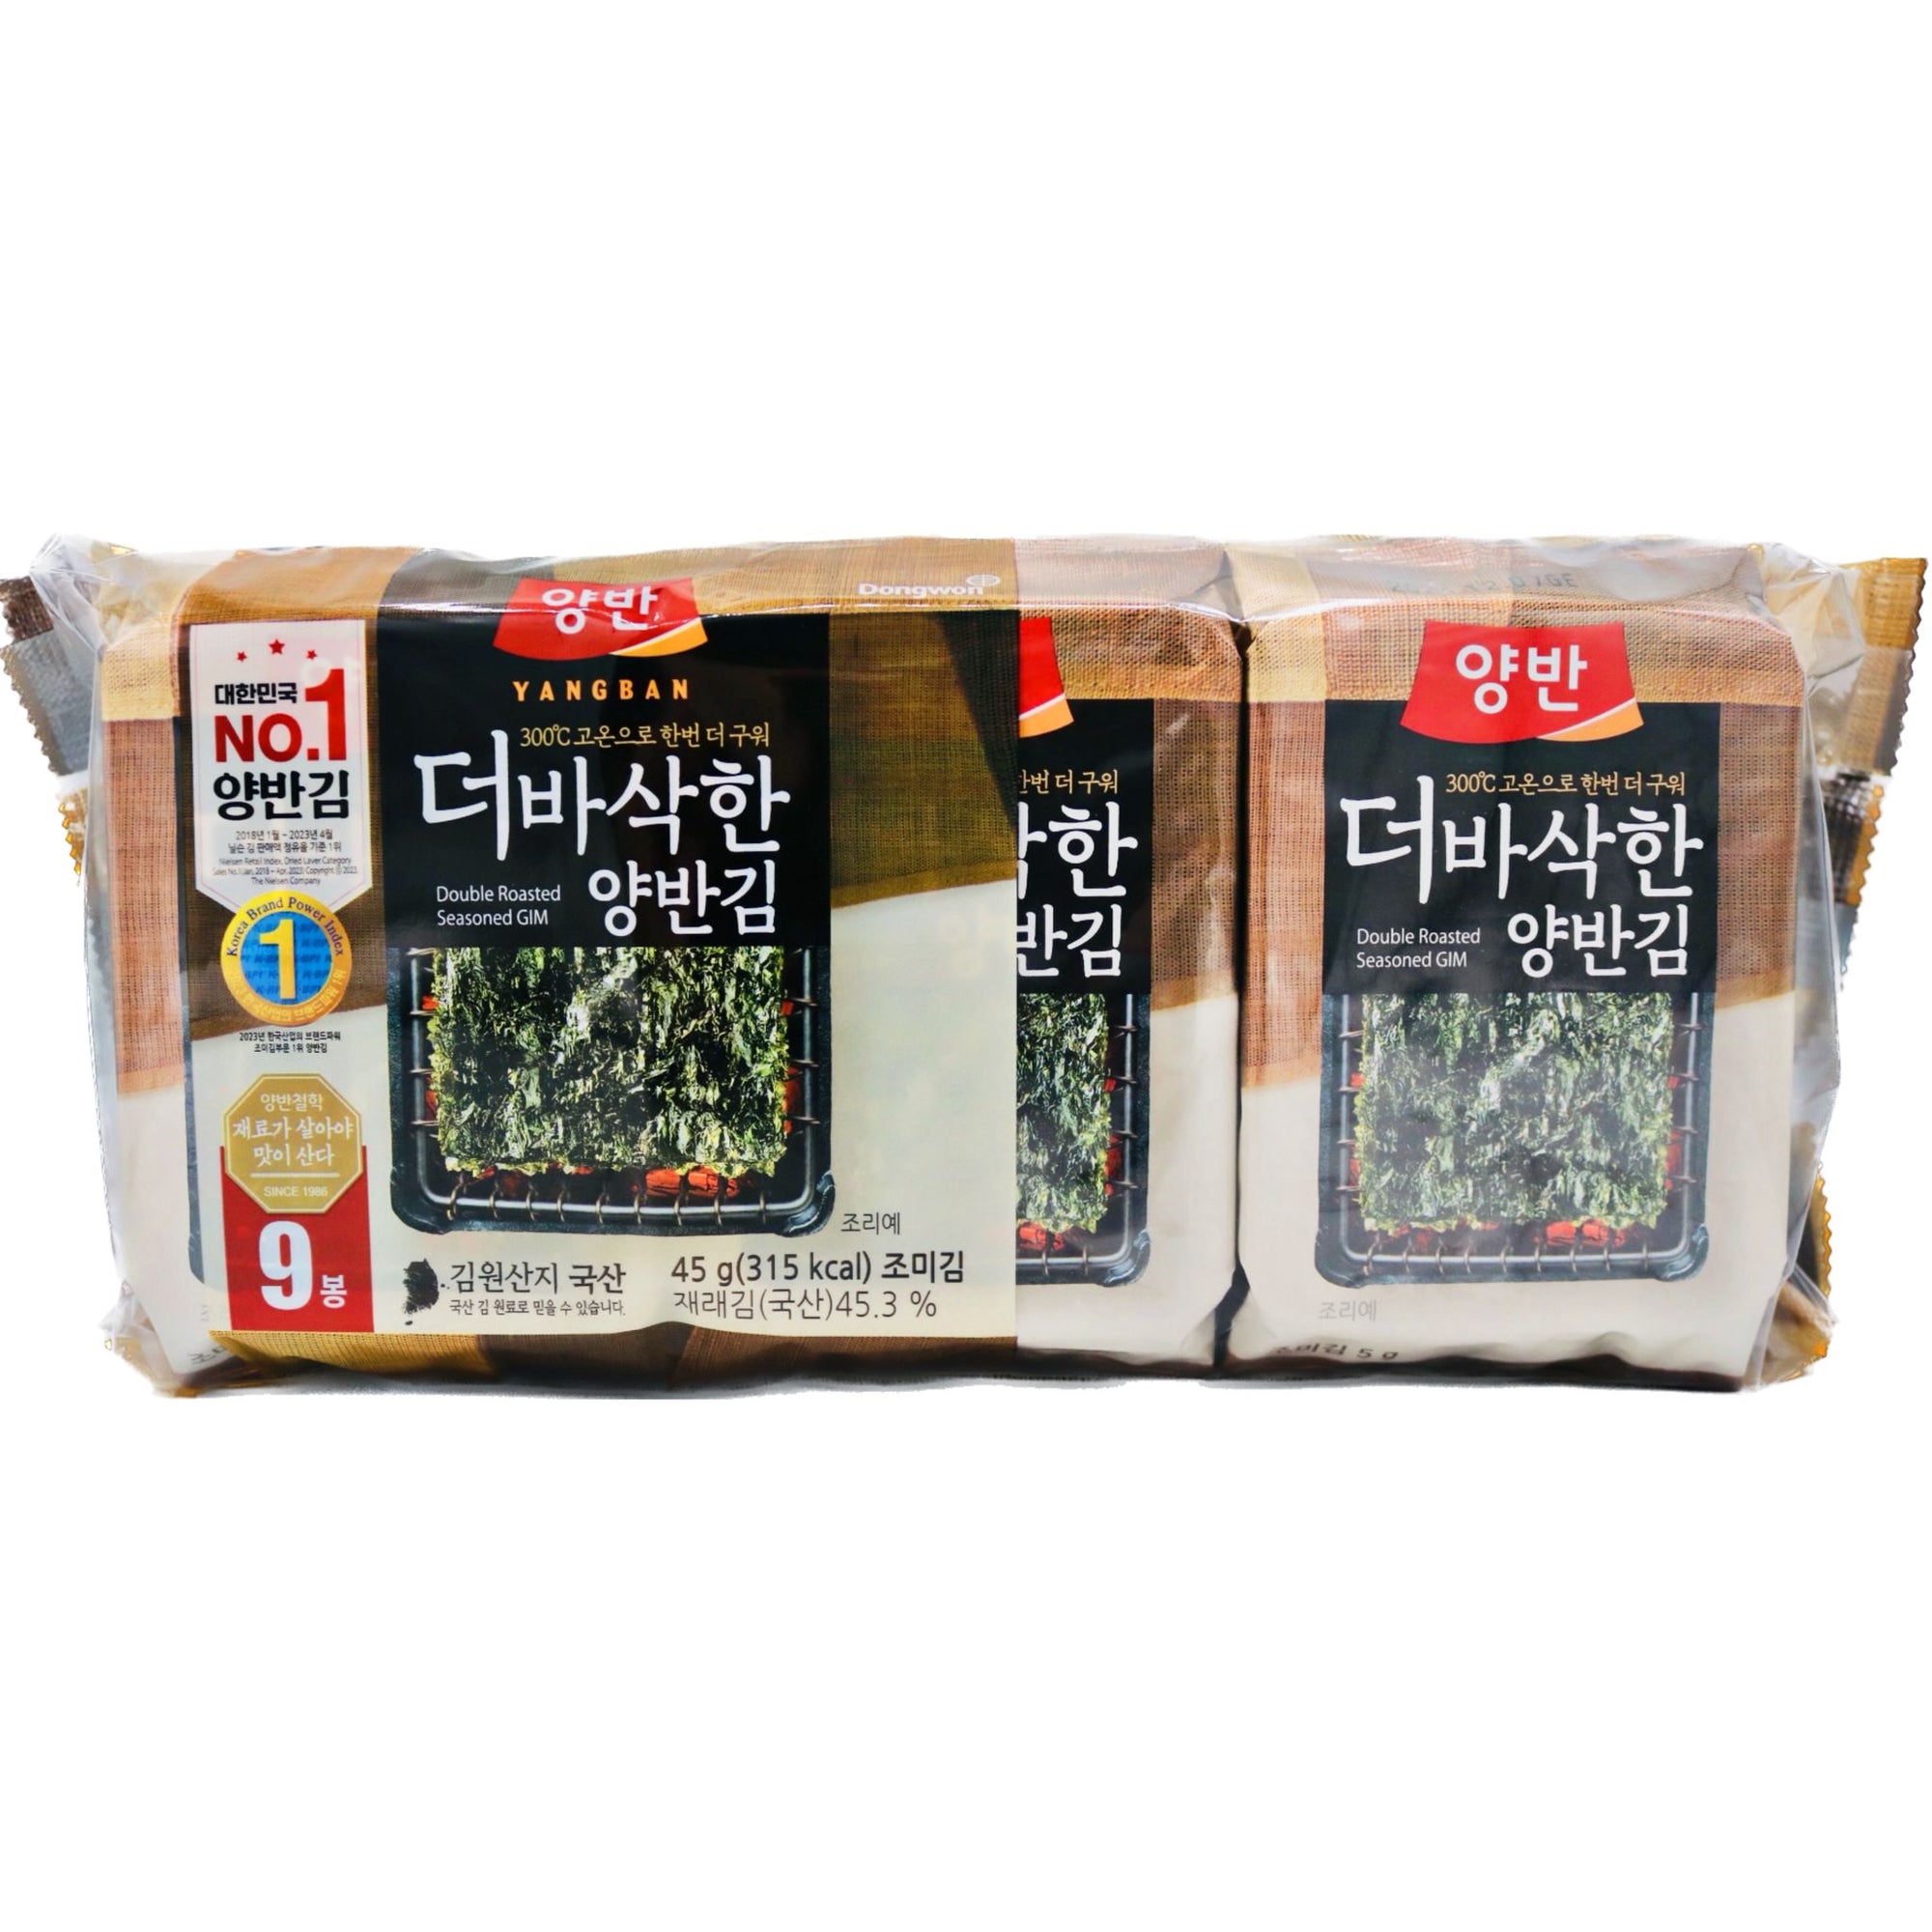 Dongwon Roasted Laver (5g*9pkgs) 45g